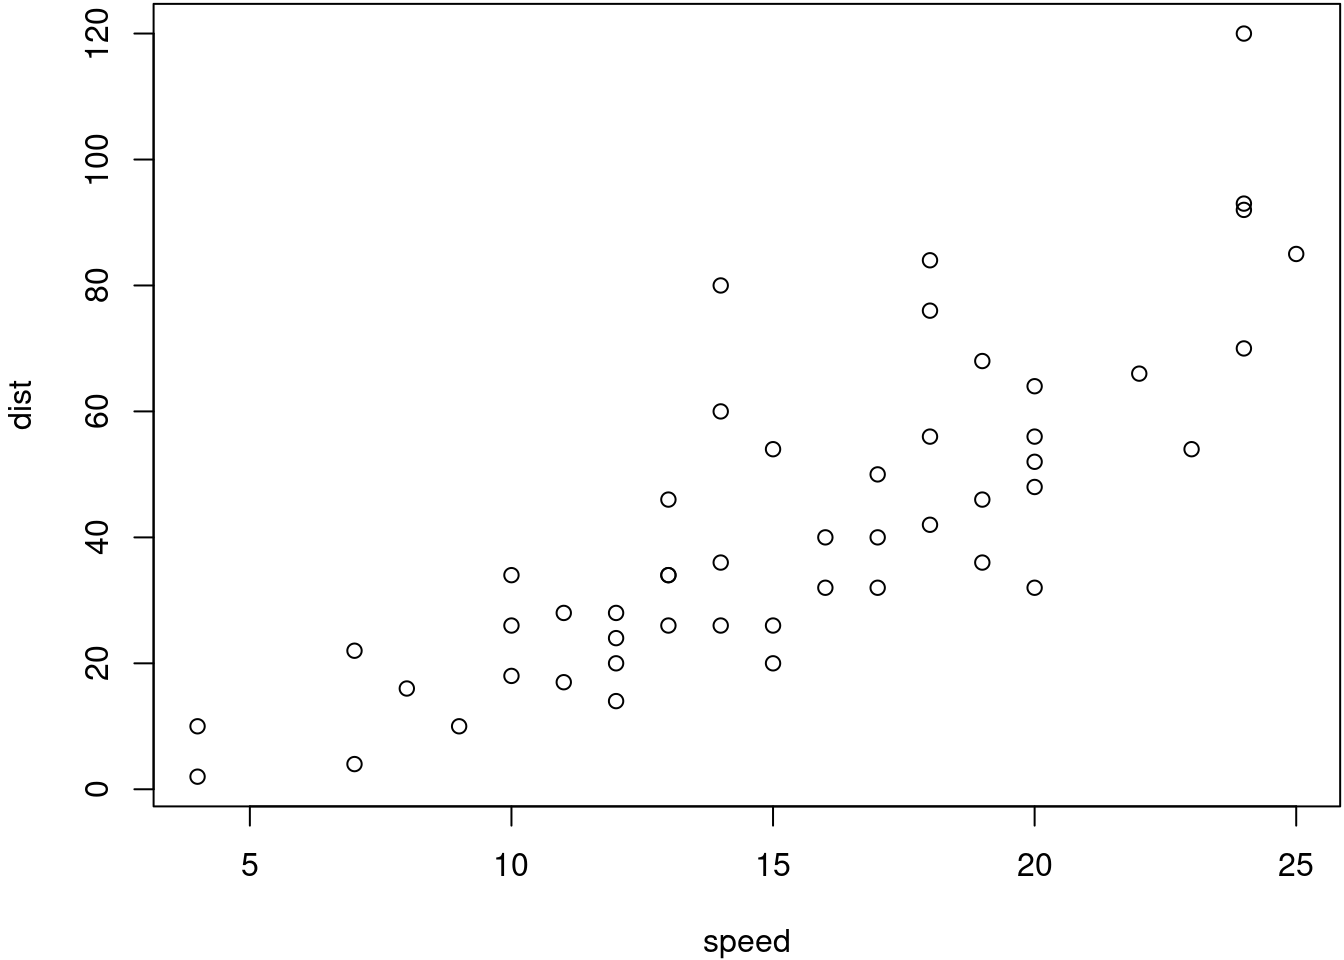 A scatterplot of the cars data.